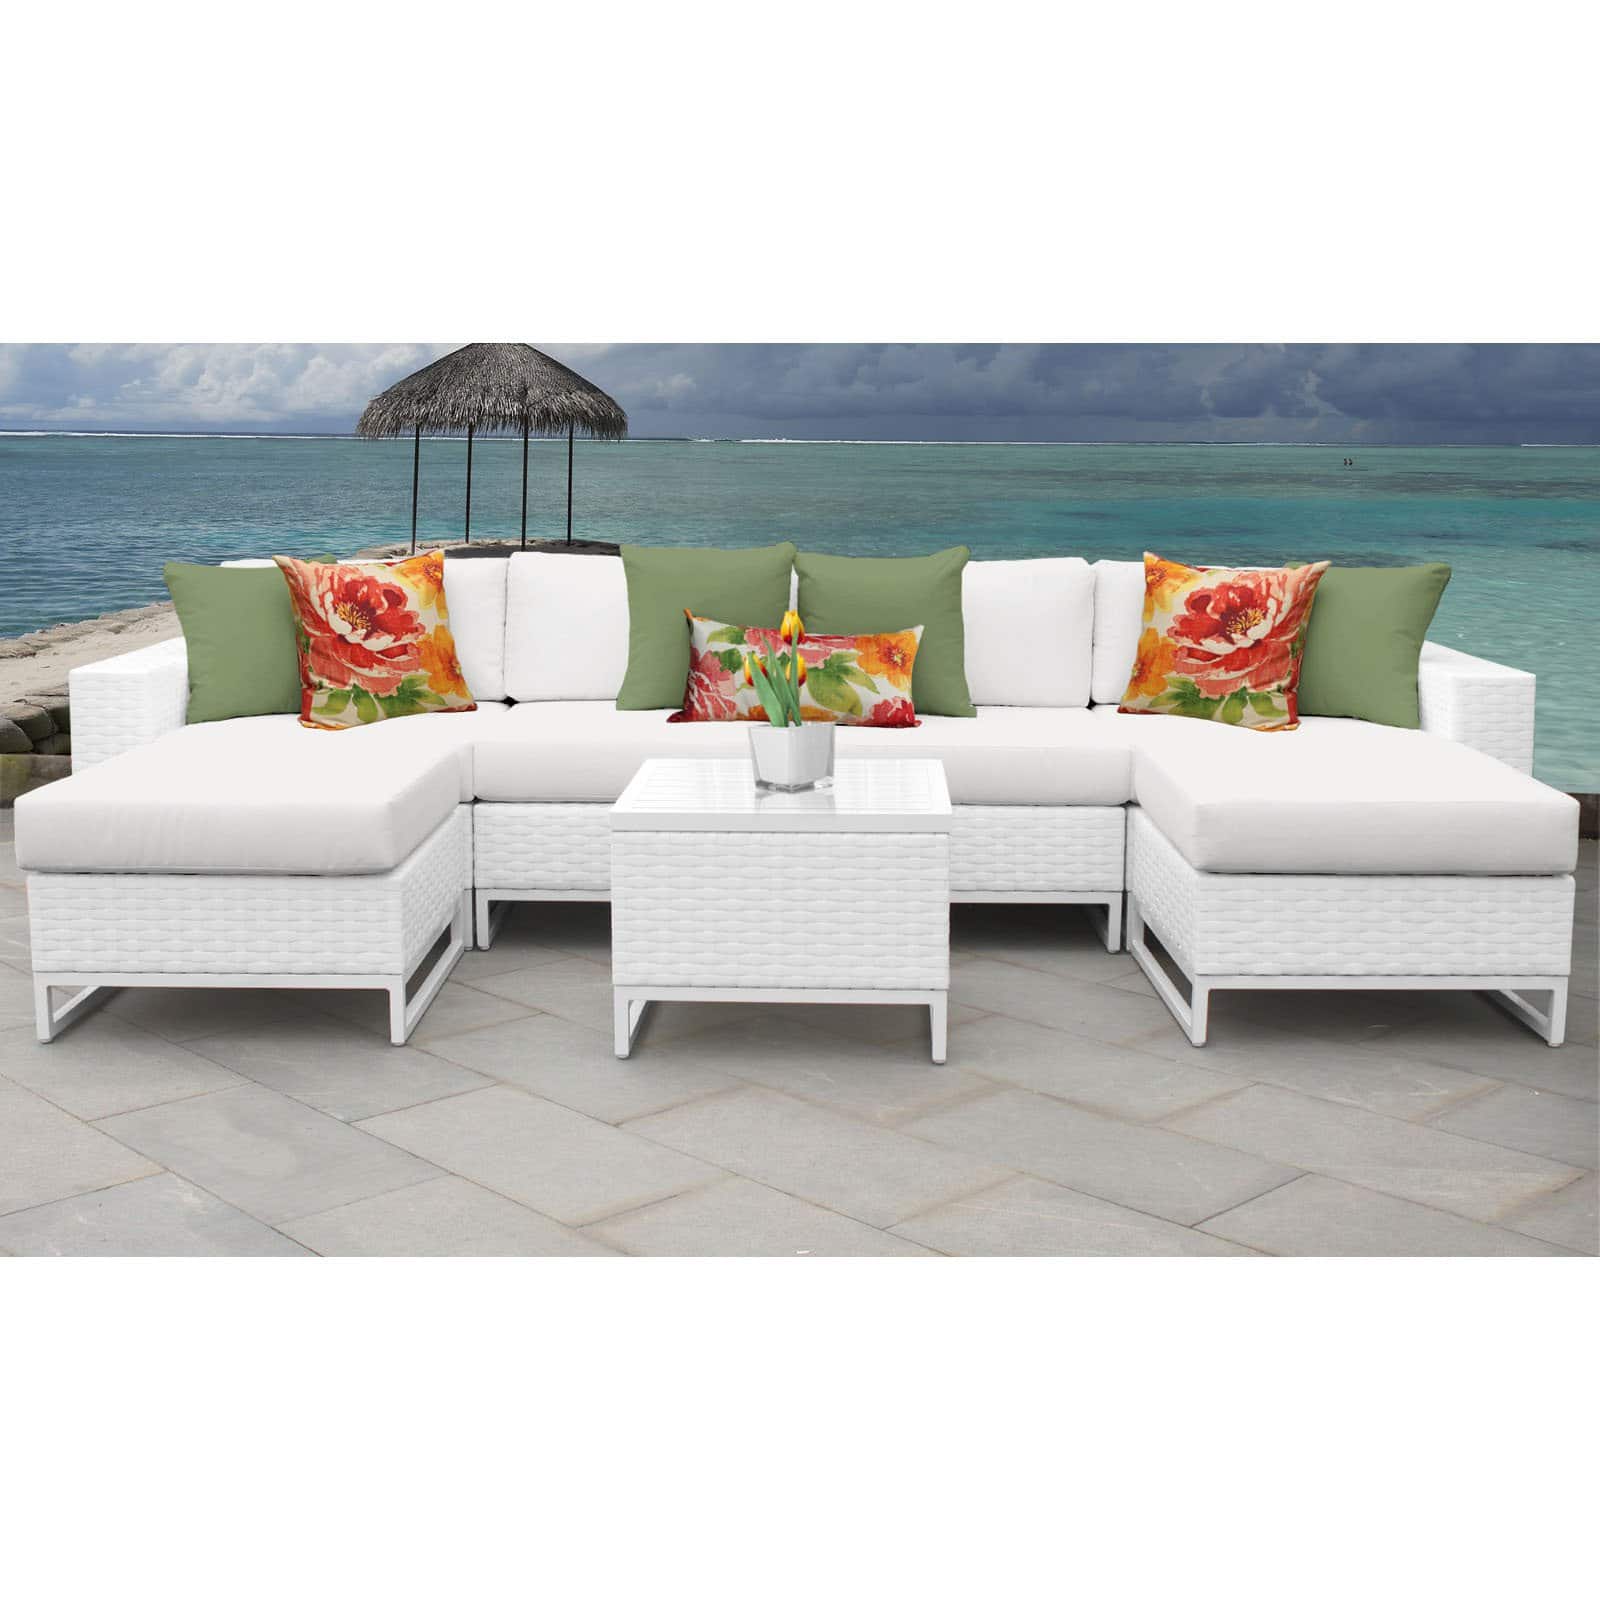 Florida 7-Piece Aluminum Framed Outdoor Conversation Set with Accent Table - image 3 of 3